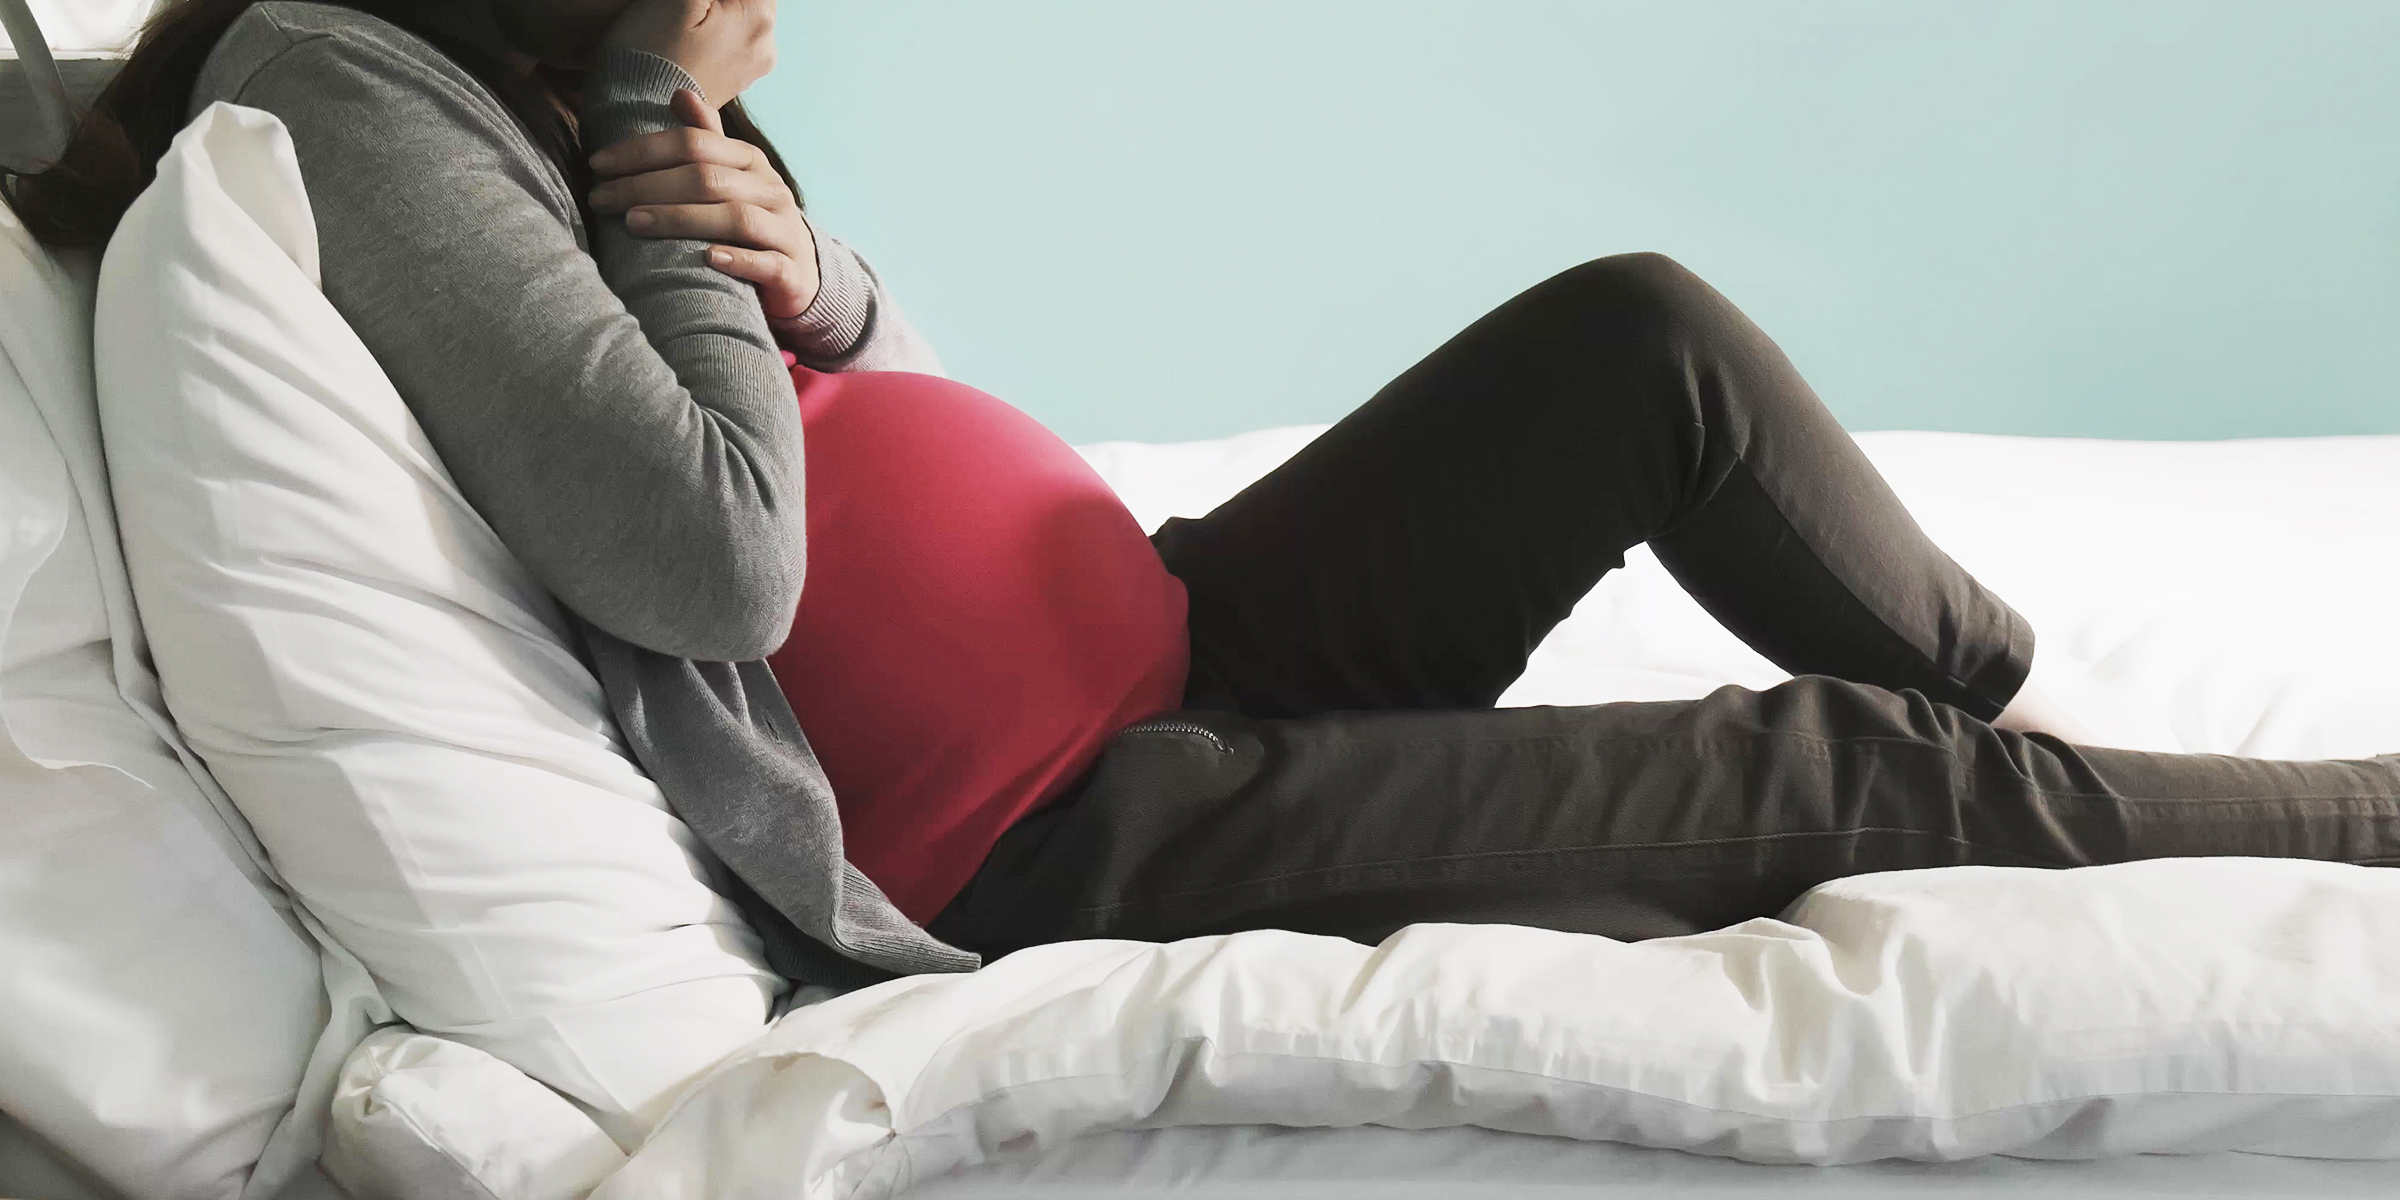 Pregnant woman sitting on a bed | Source: Shutterstock